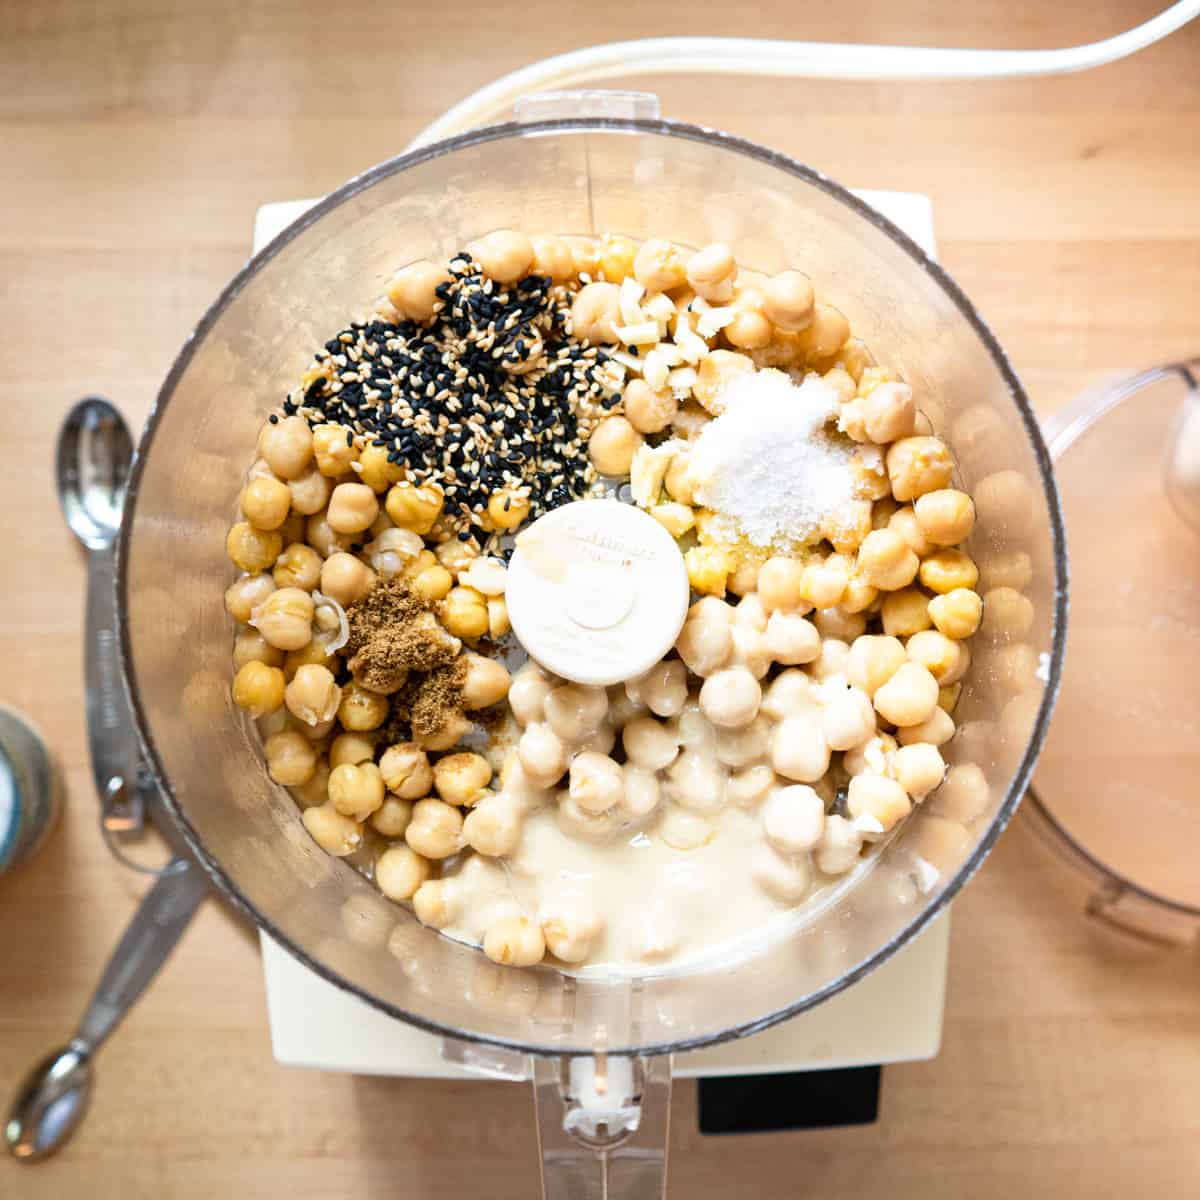 All ingredients for hummus in a food processor before pureeing. 